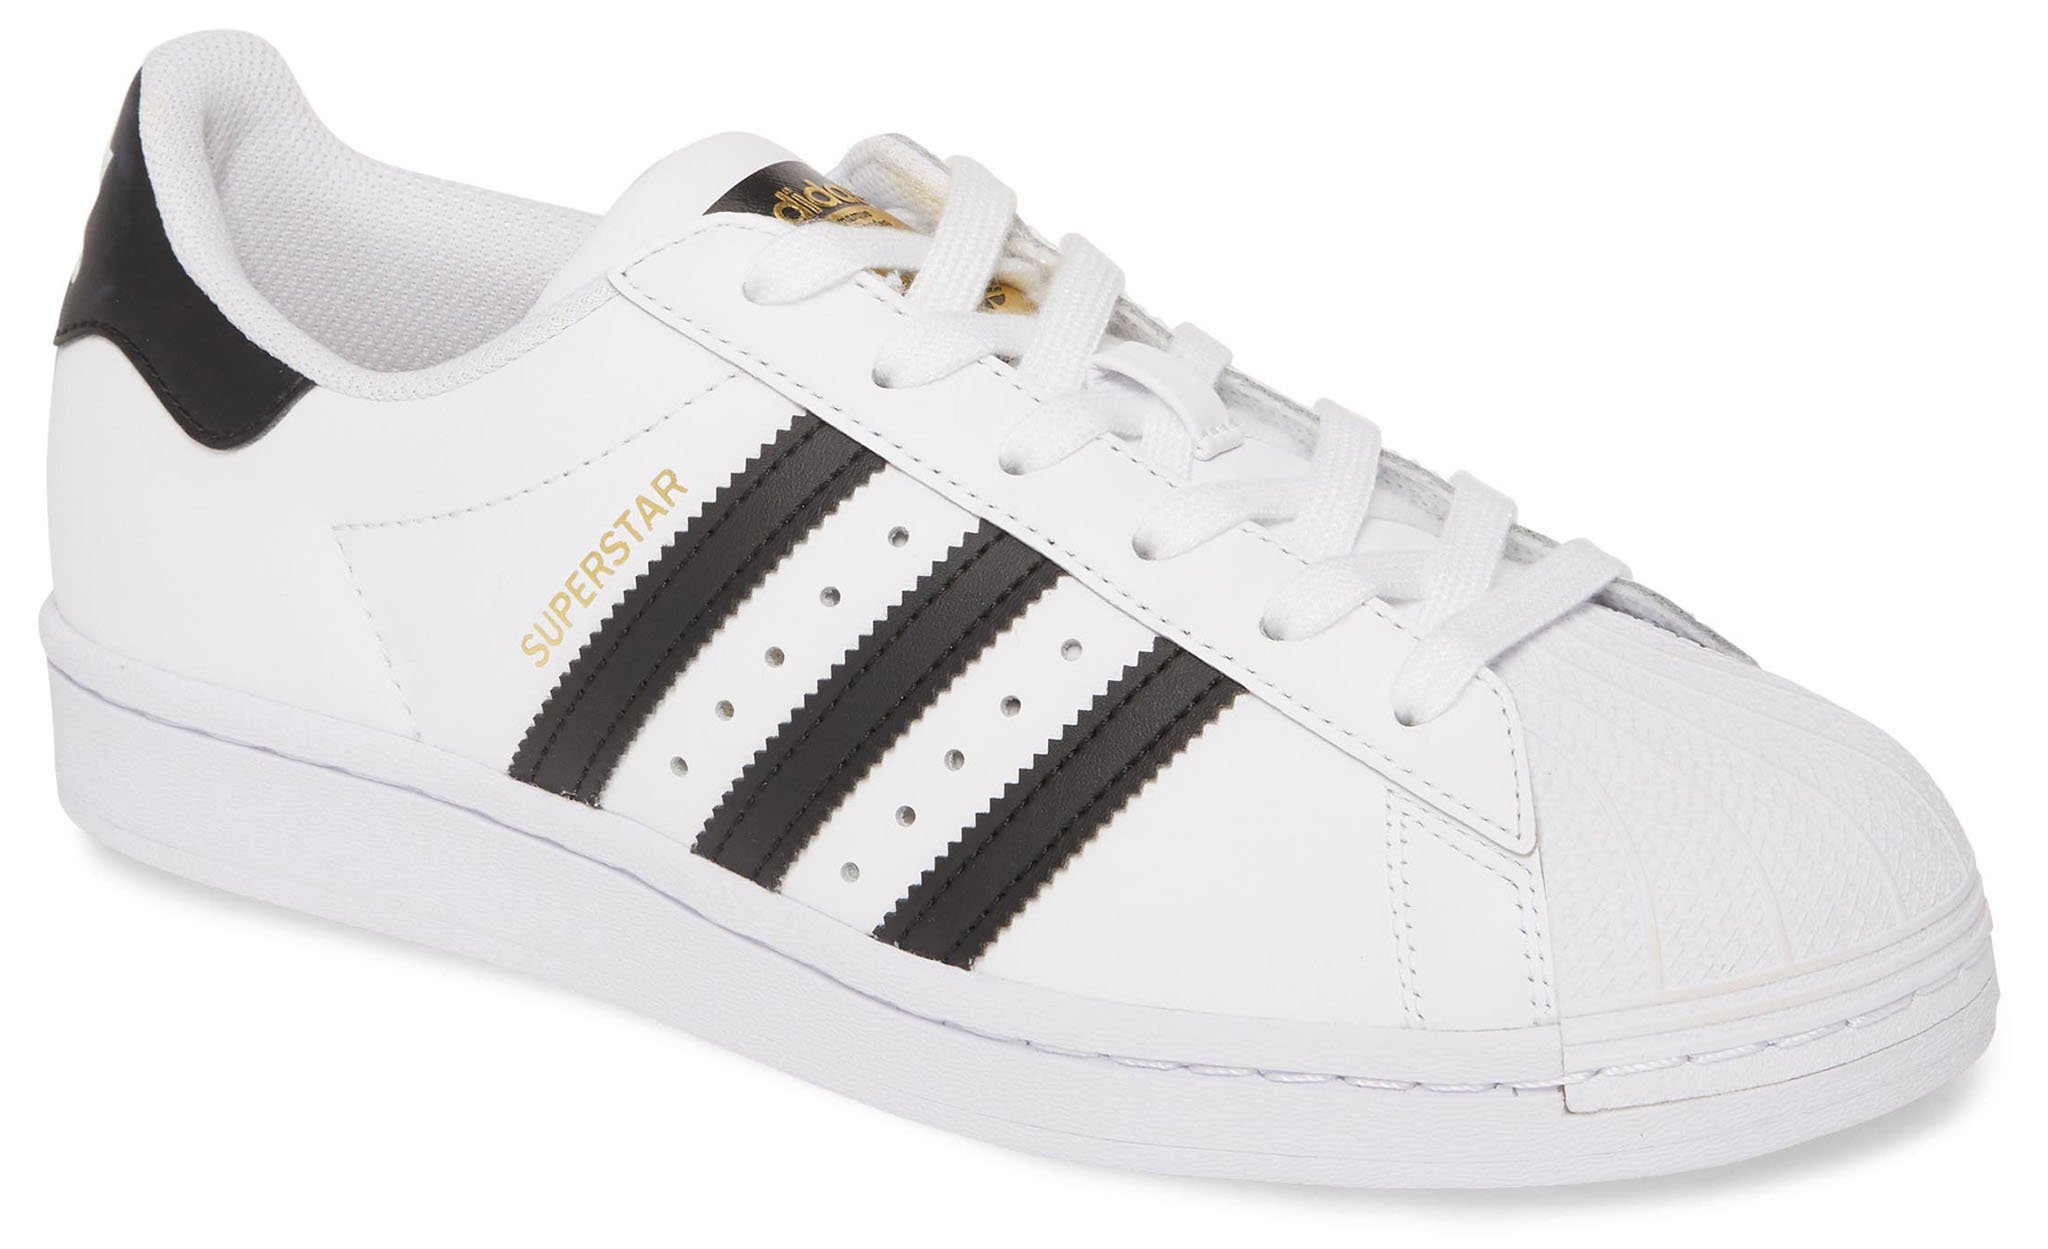 The Superstar is one of Adidas' most iconic silhouettes featuring serrated 3-stripes and a clamshell toe